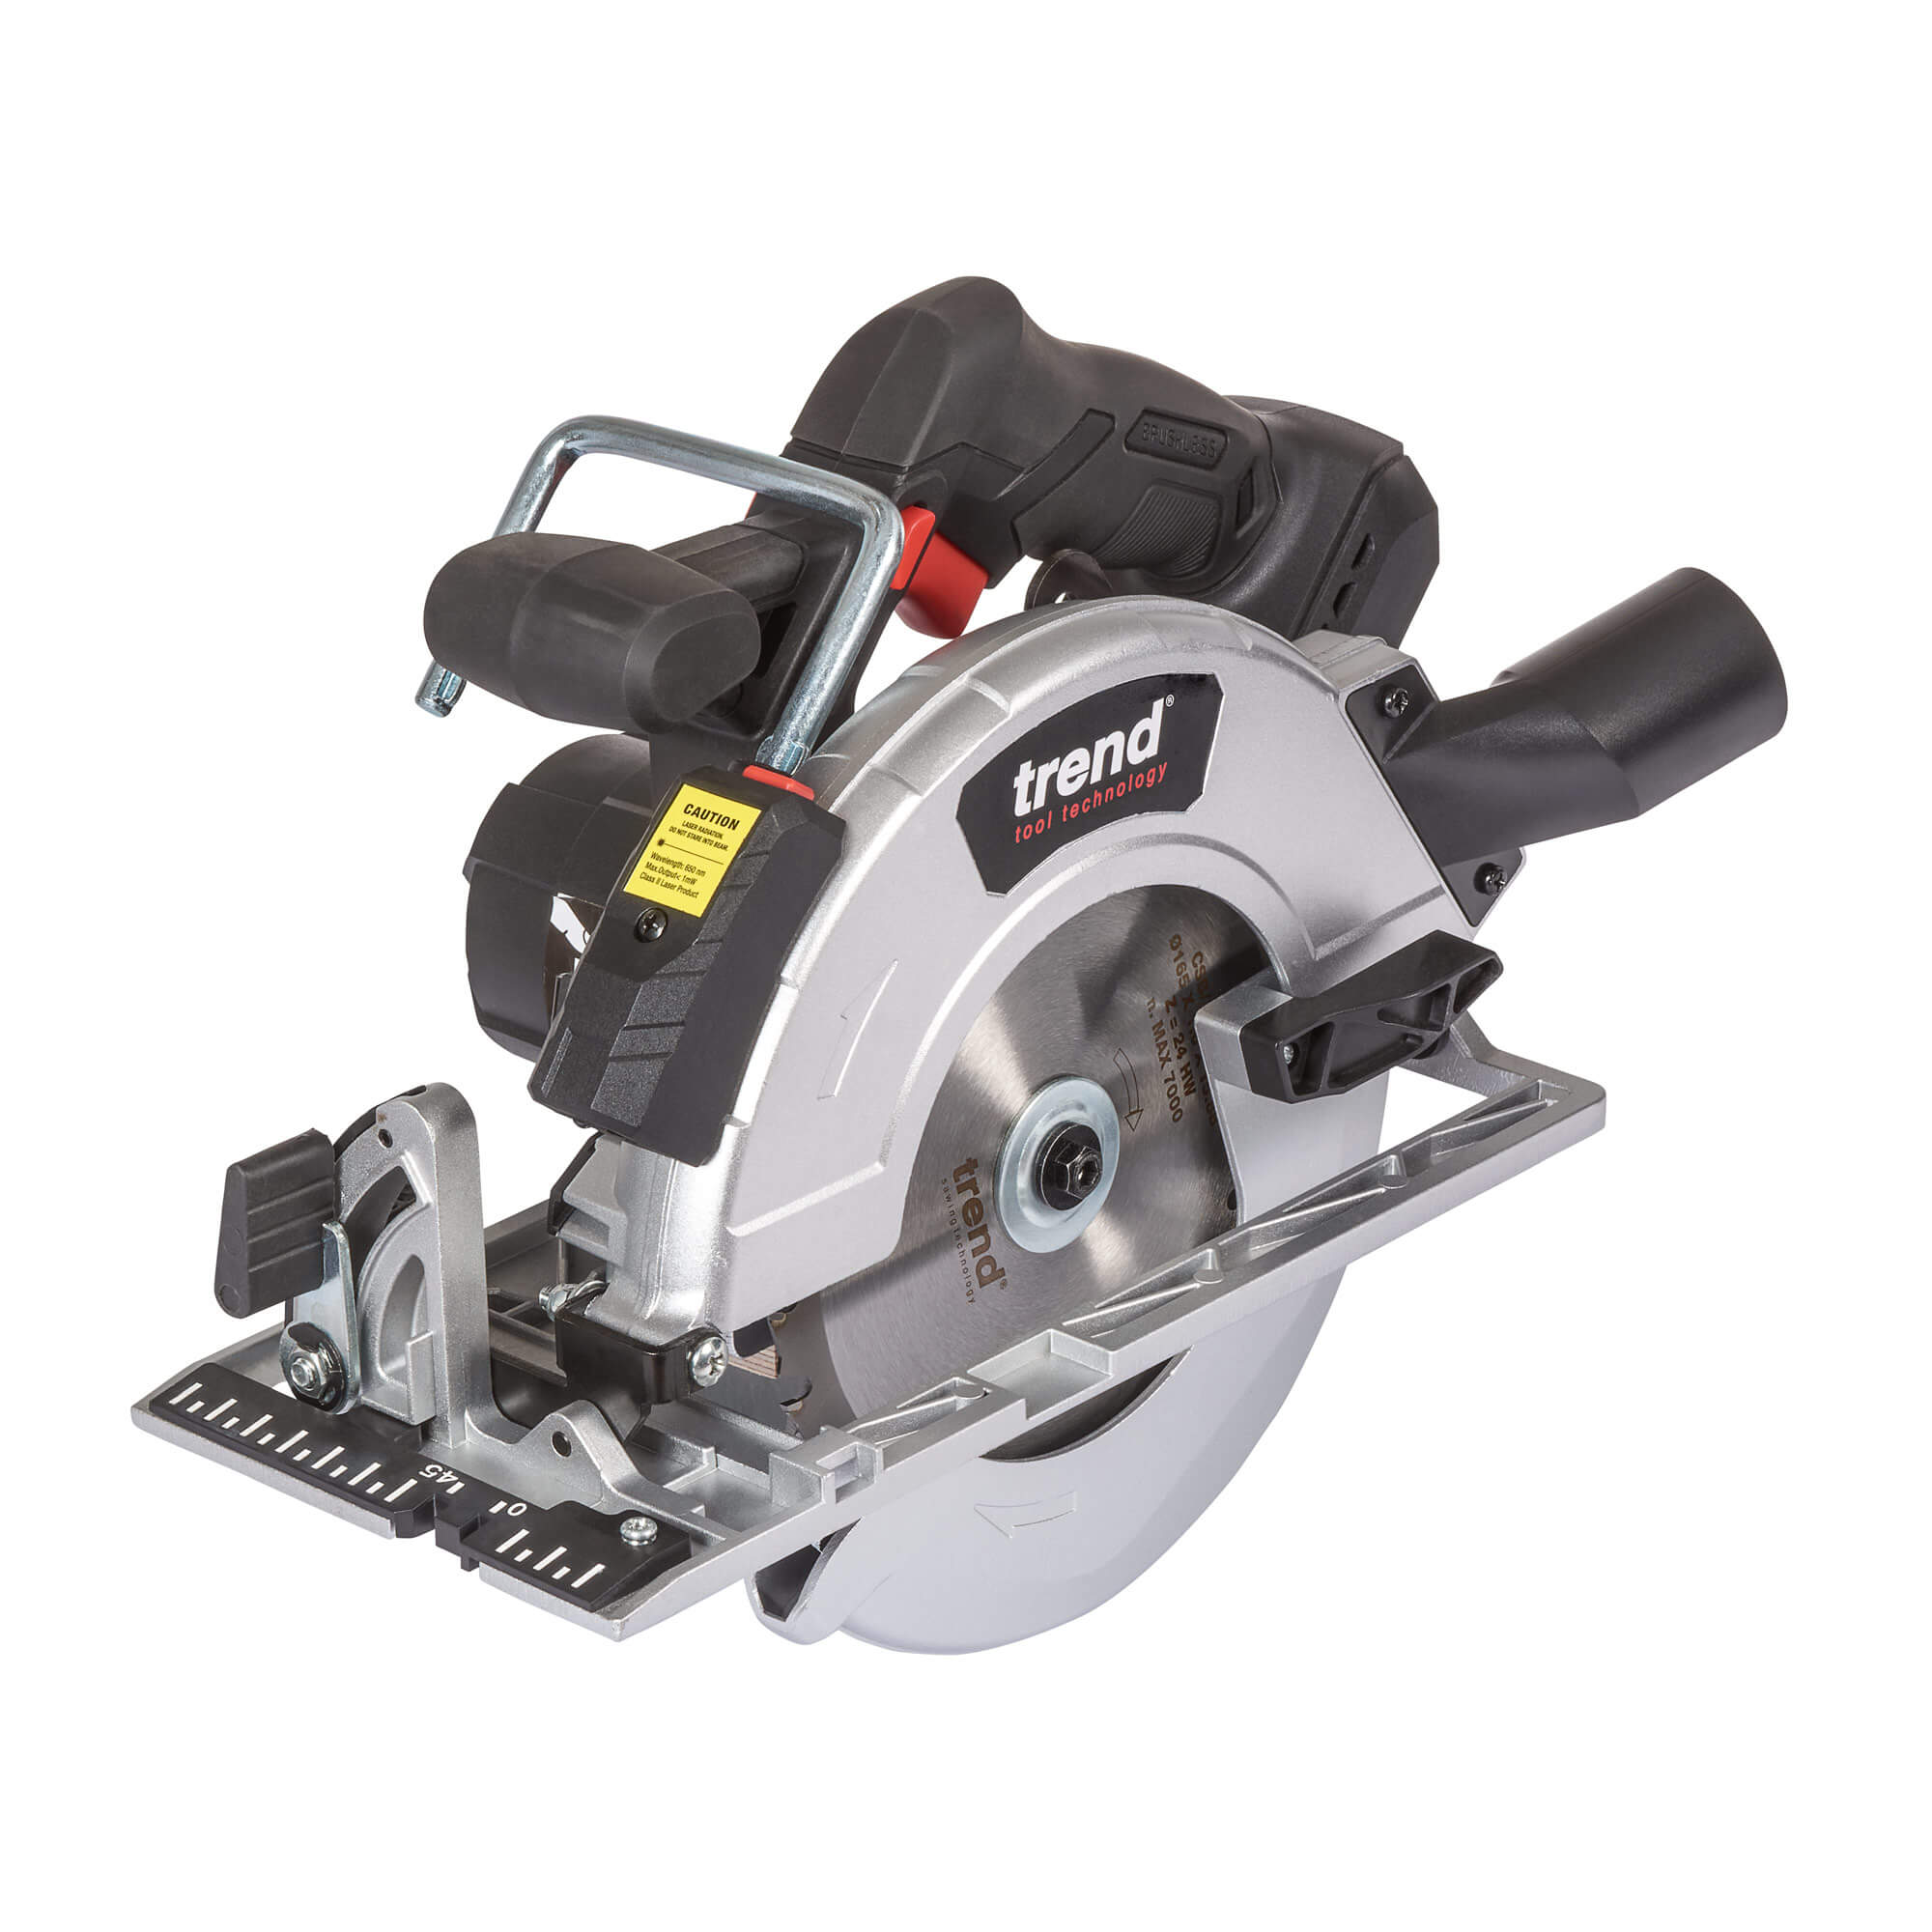 Photo of Trend T18s/cs165b 18v Cordless Brushless Circular Saw 165mm No Batteries No Charger No Case